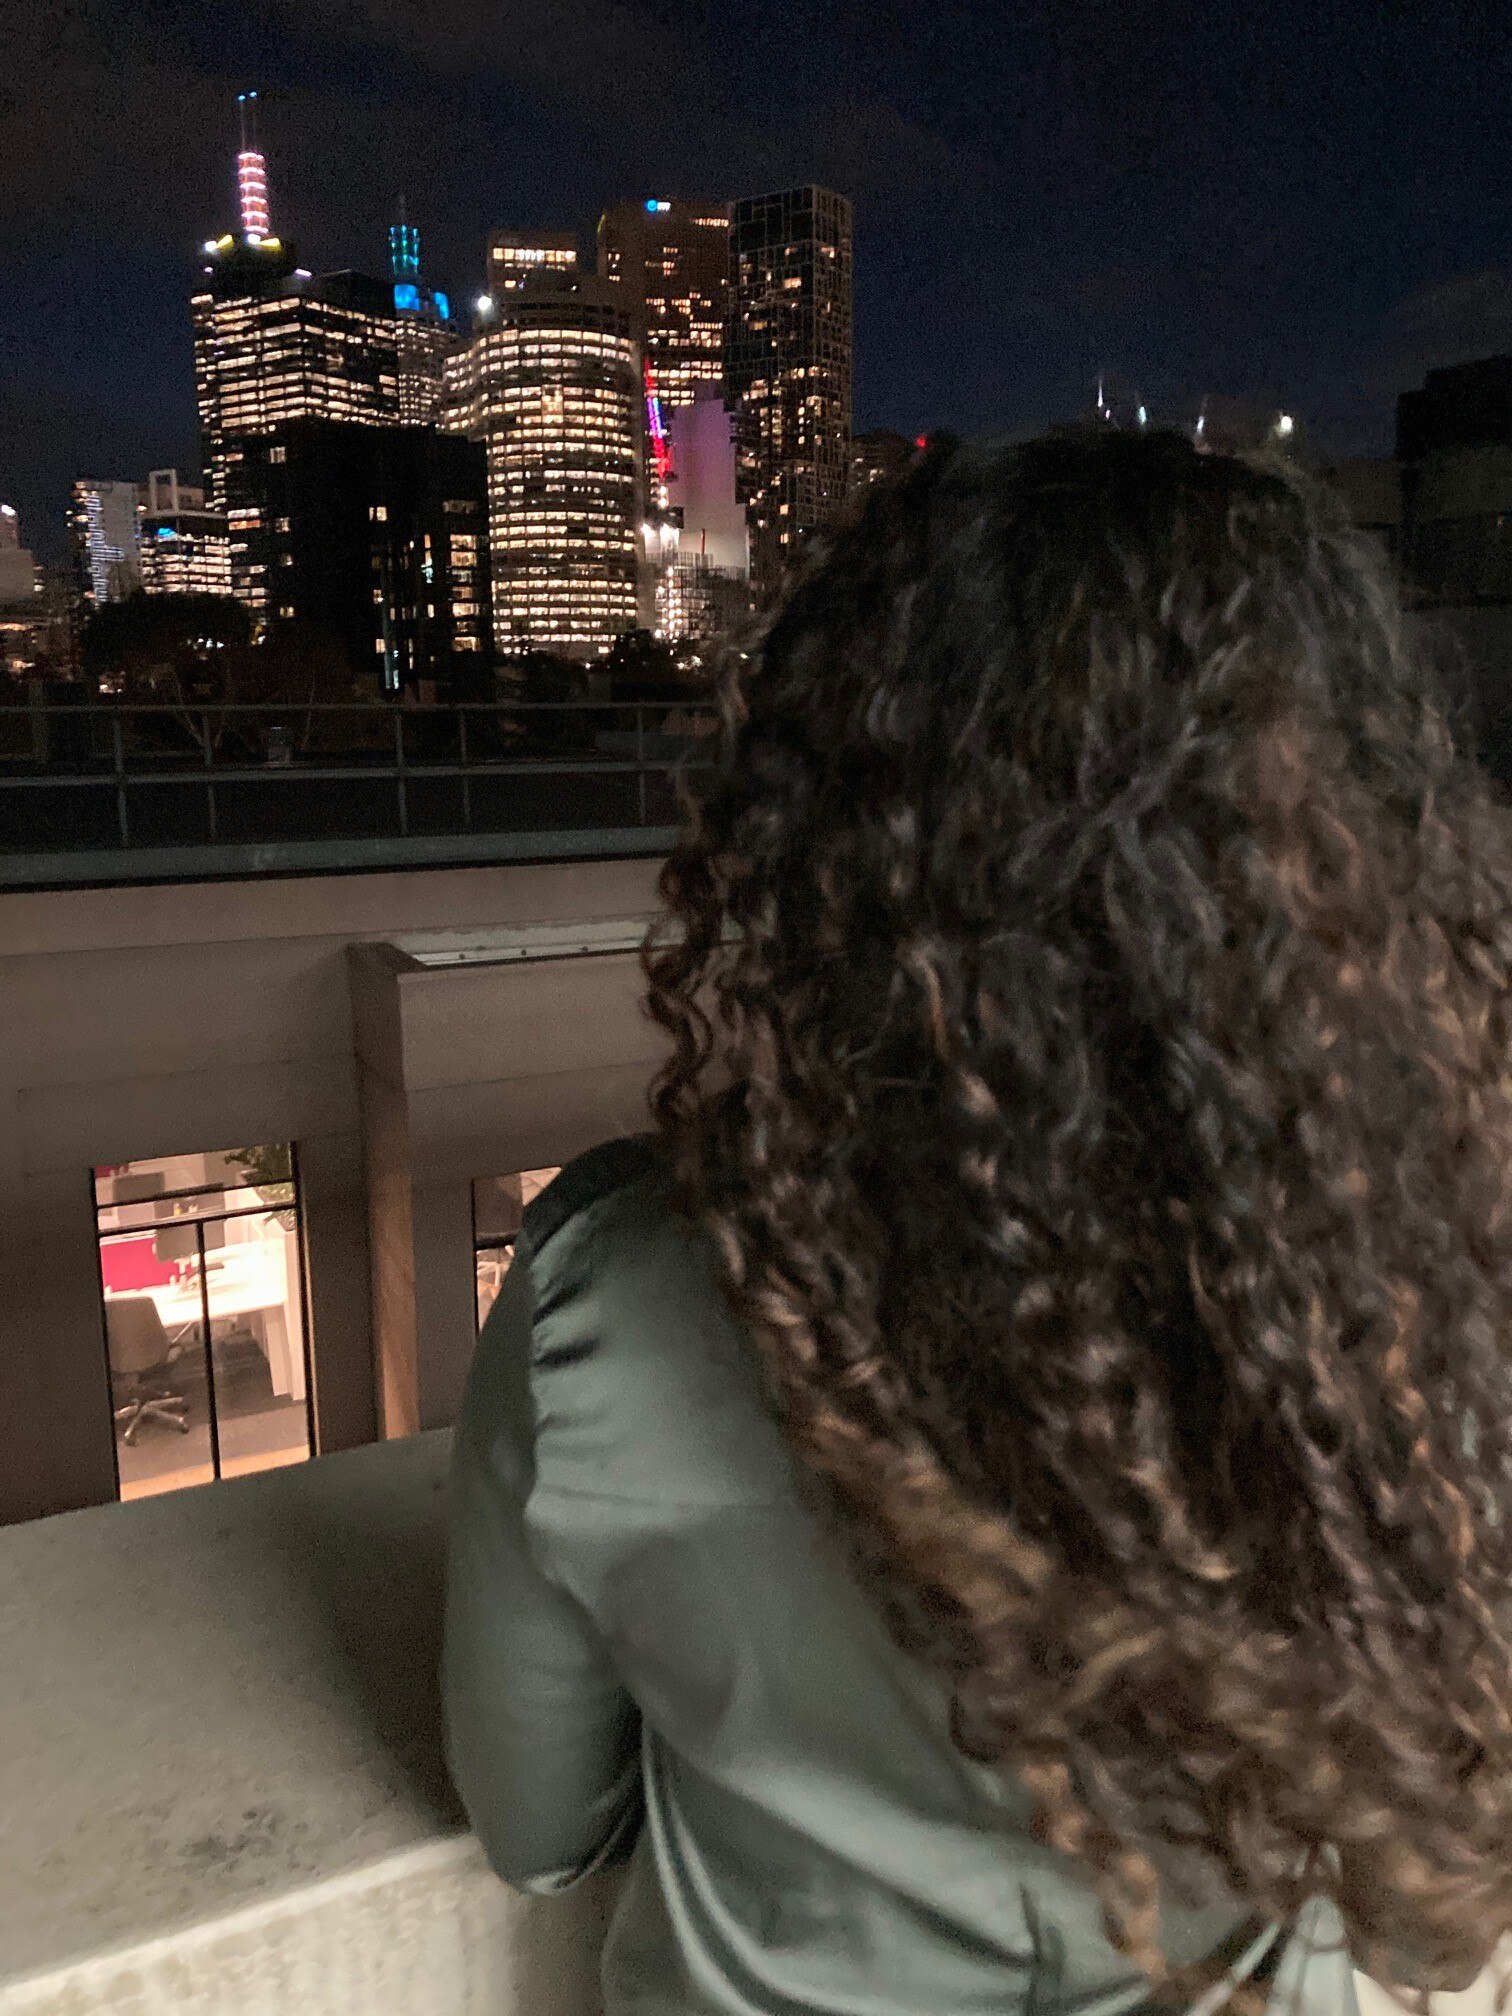 The back of a woman's head as she looks at the skyline of the city at night.